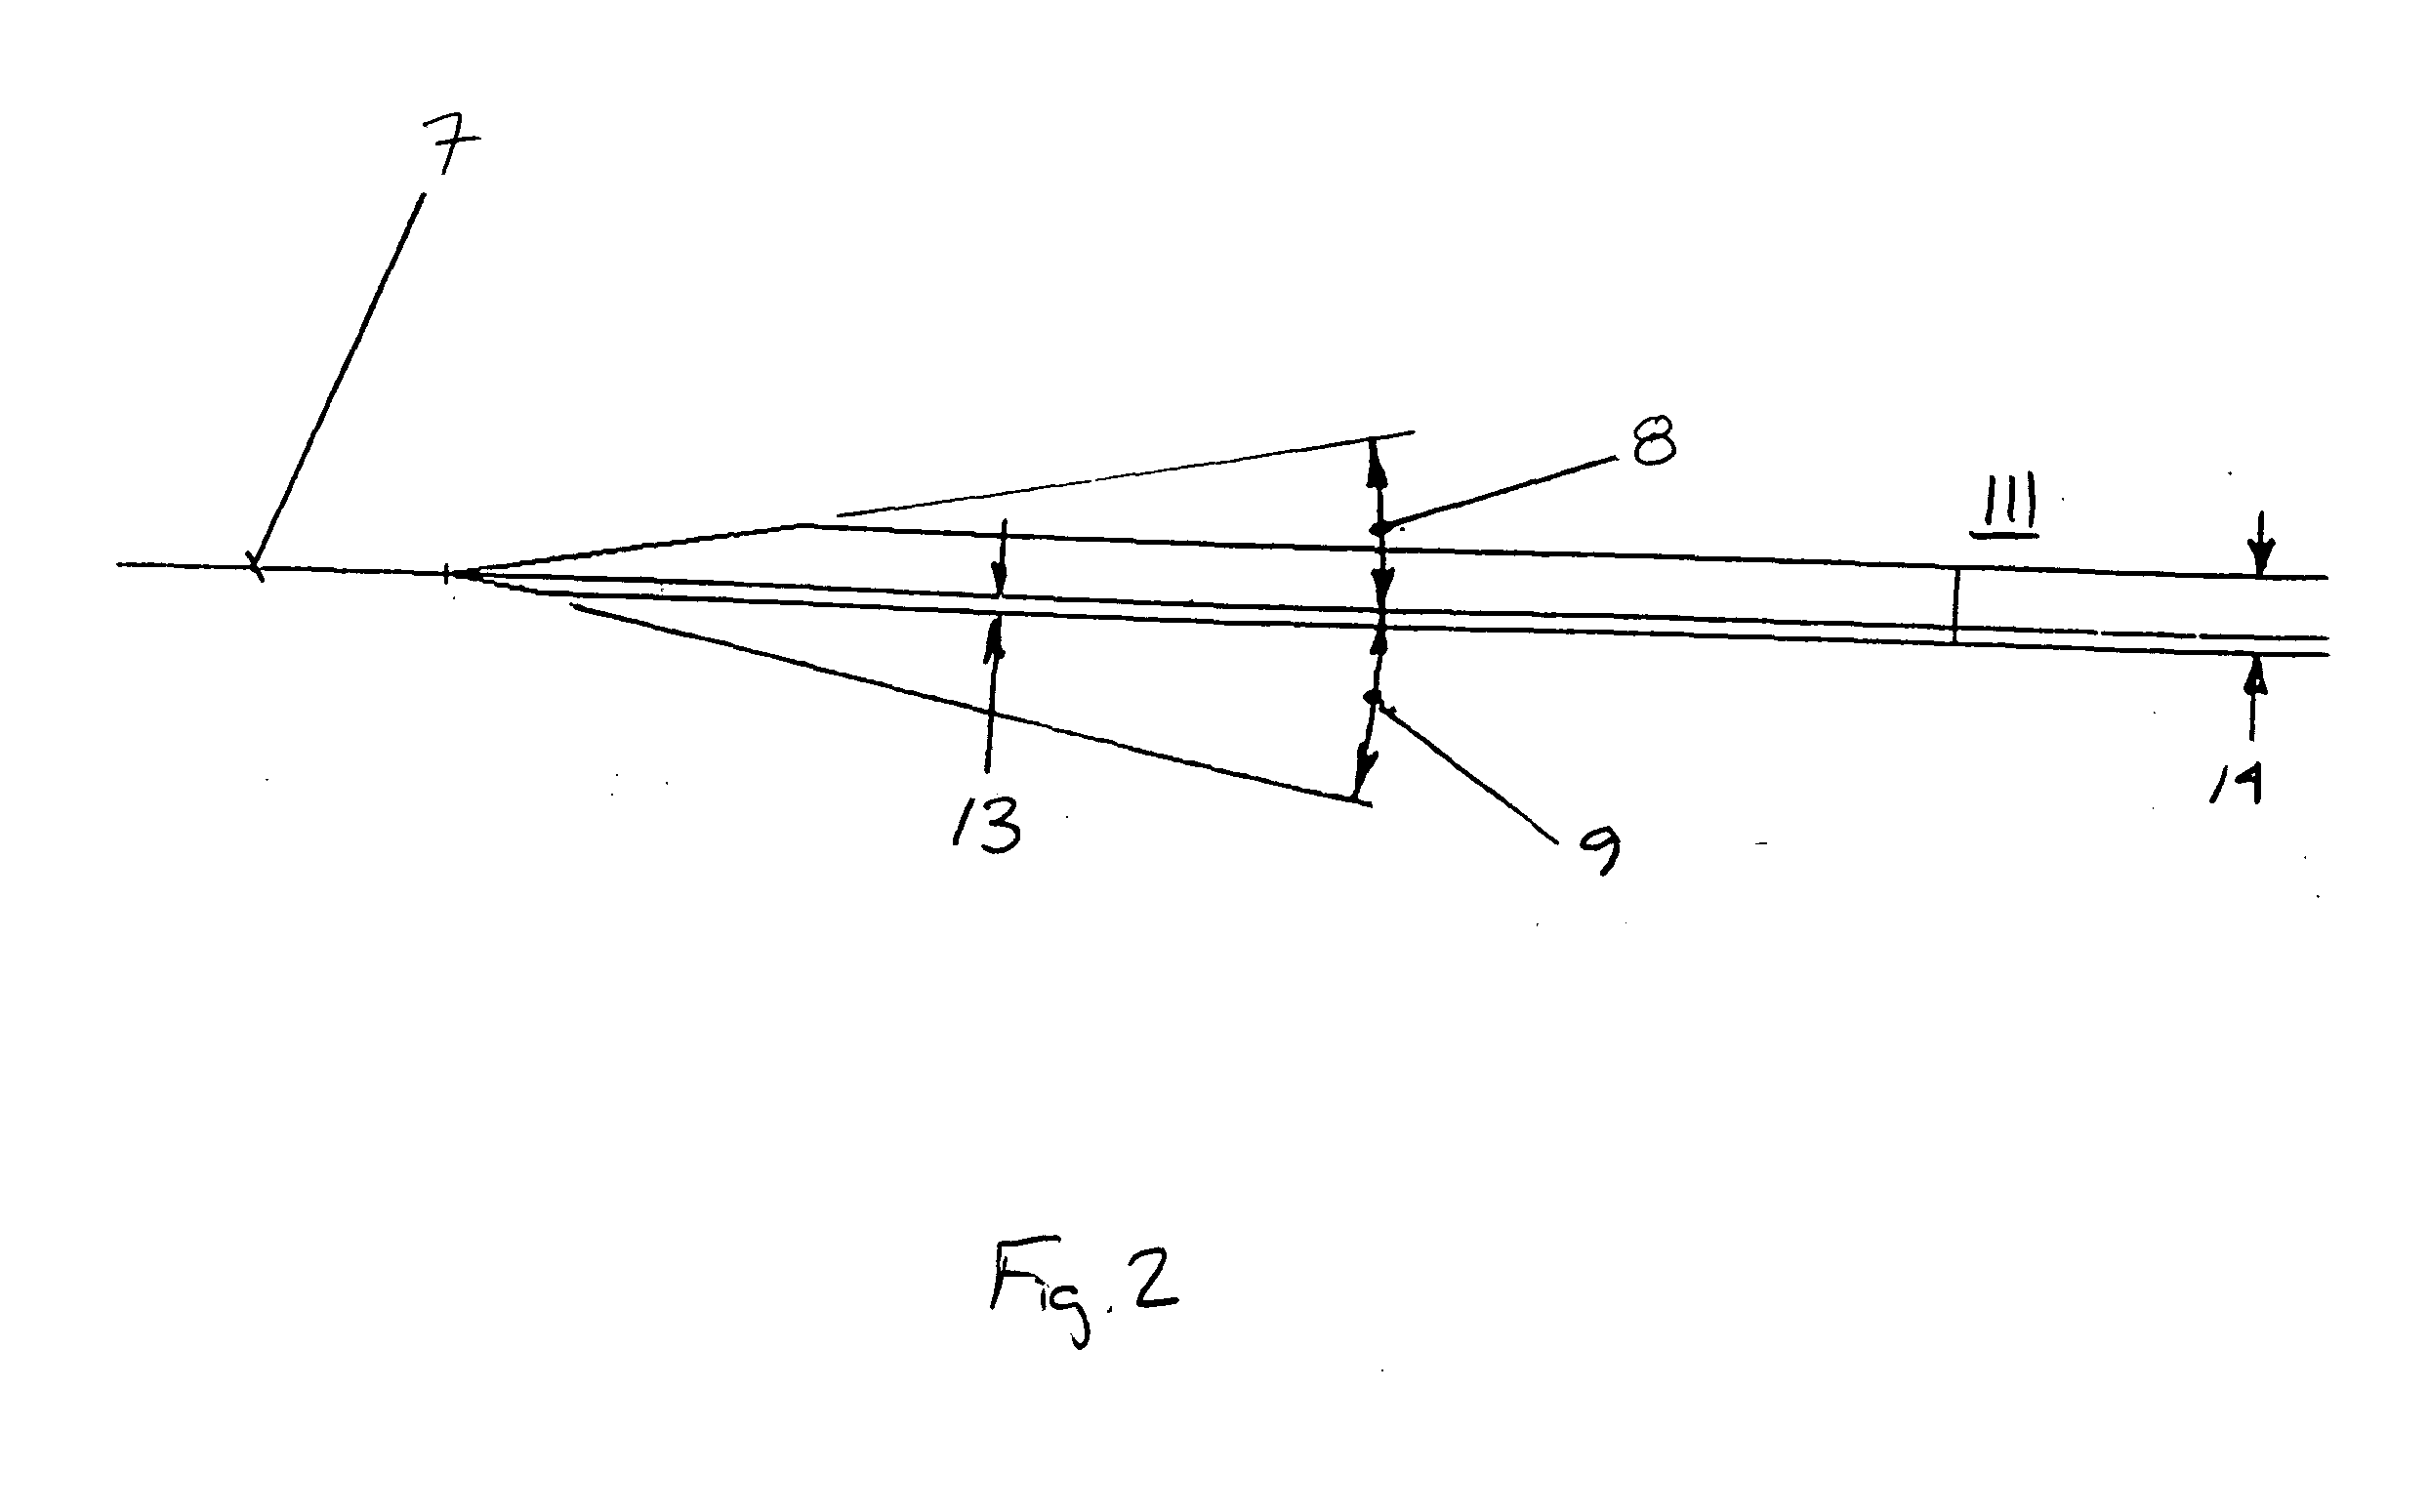 Non-separating diffuser for holes produced by a two step process